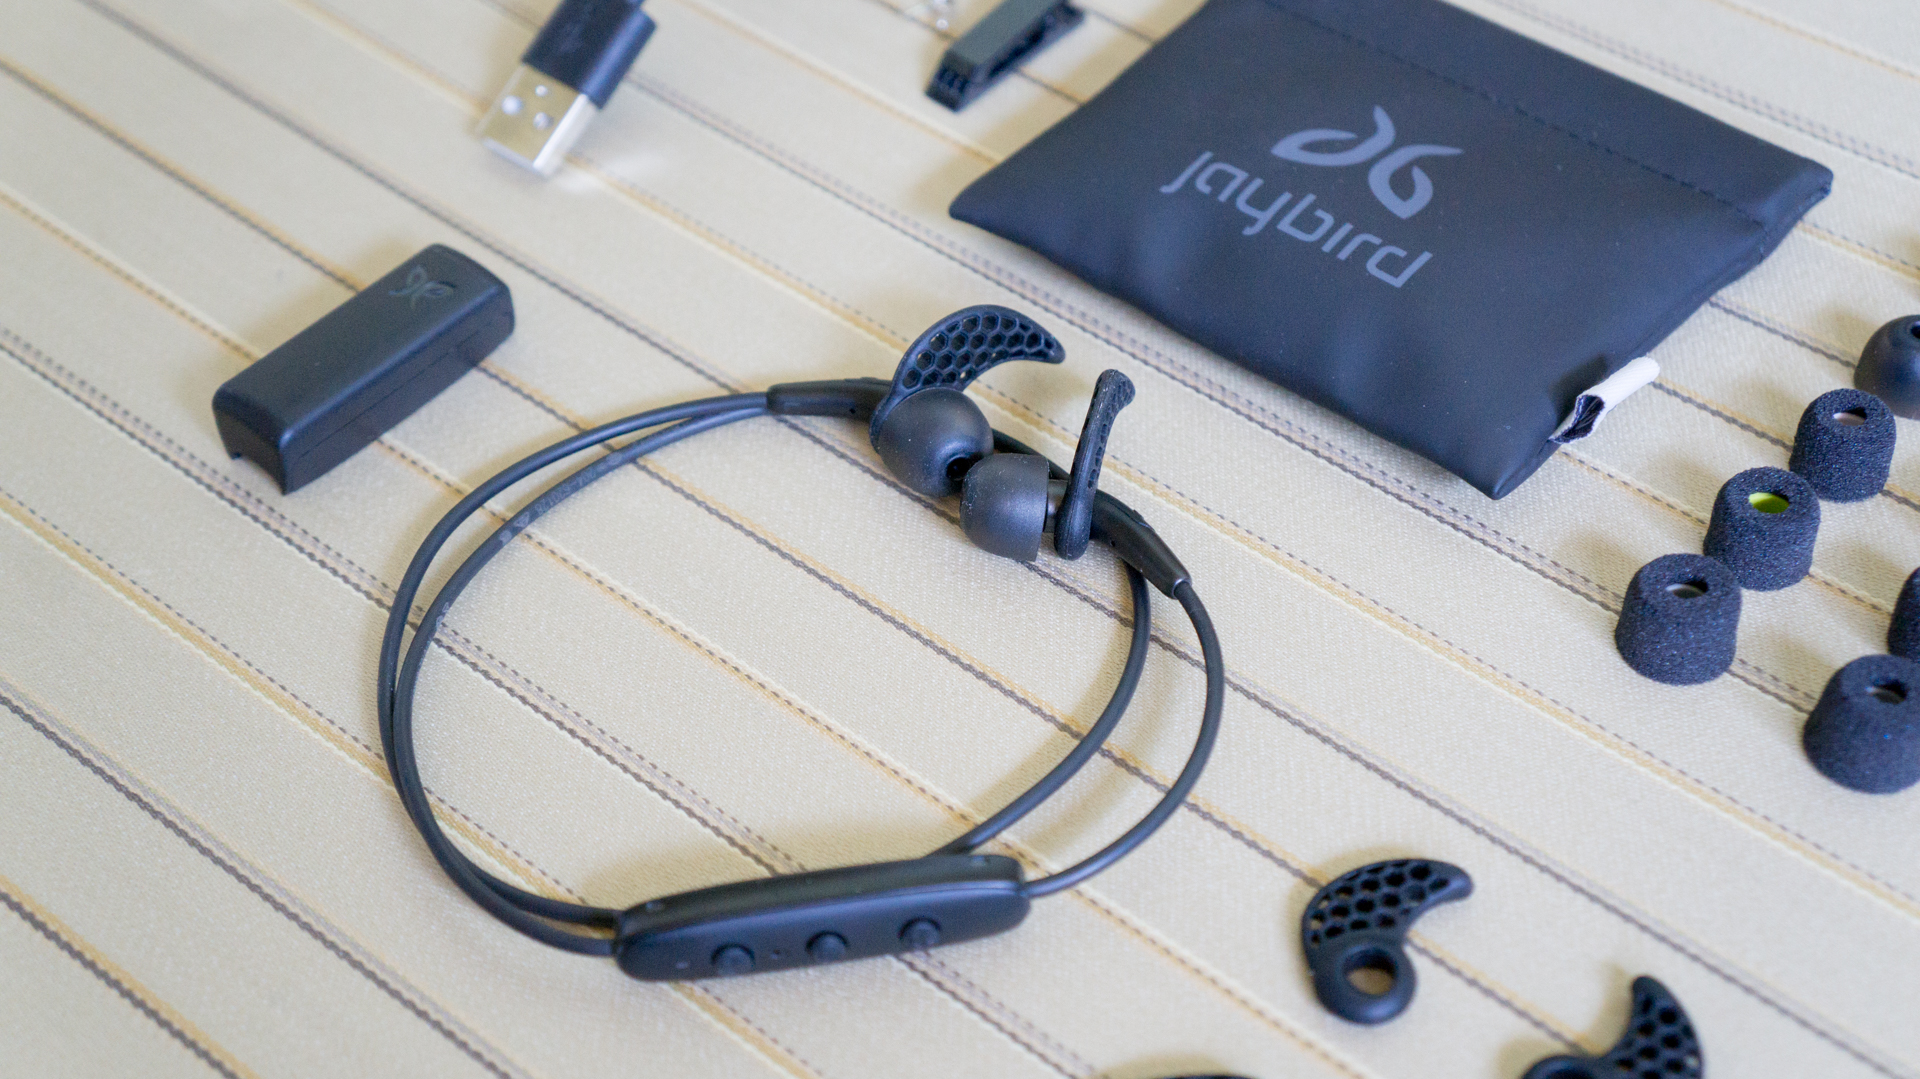 How do the top-rated wireless ear buds compare to the top-rated wired ear buds?